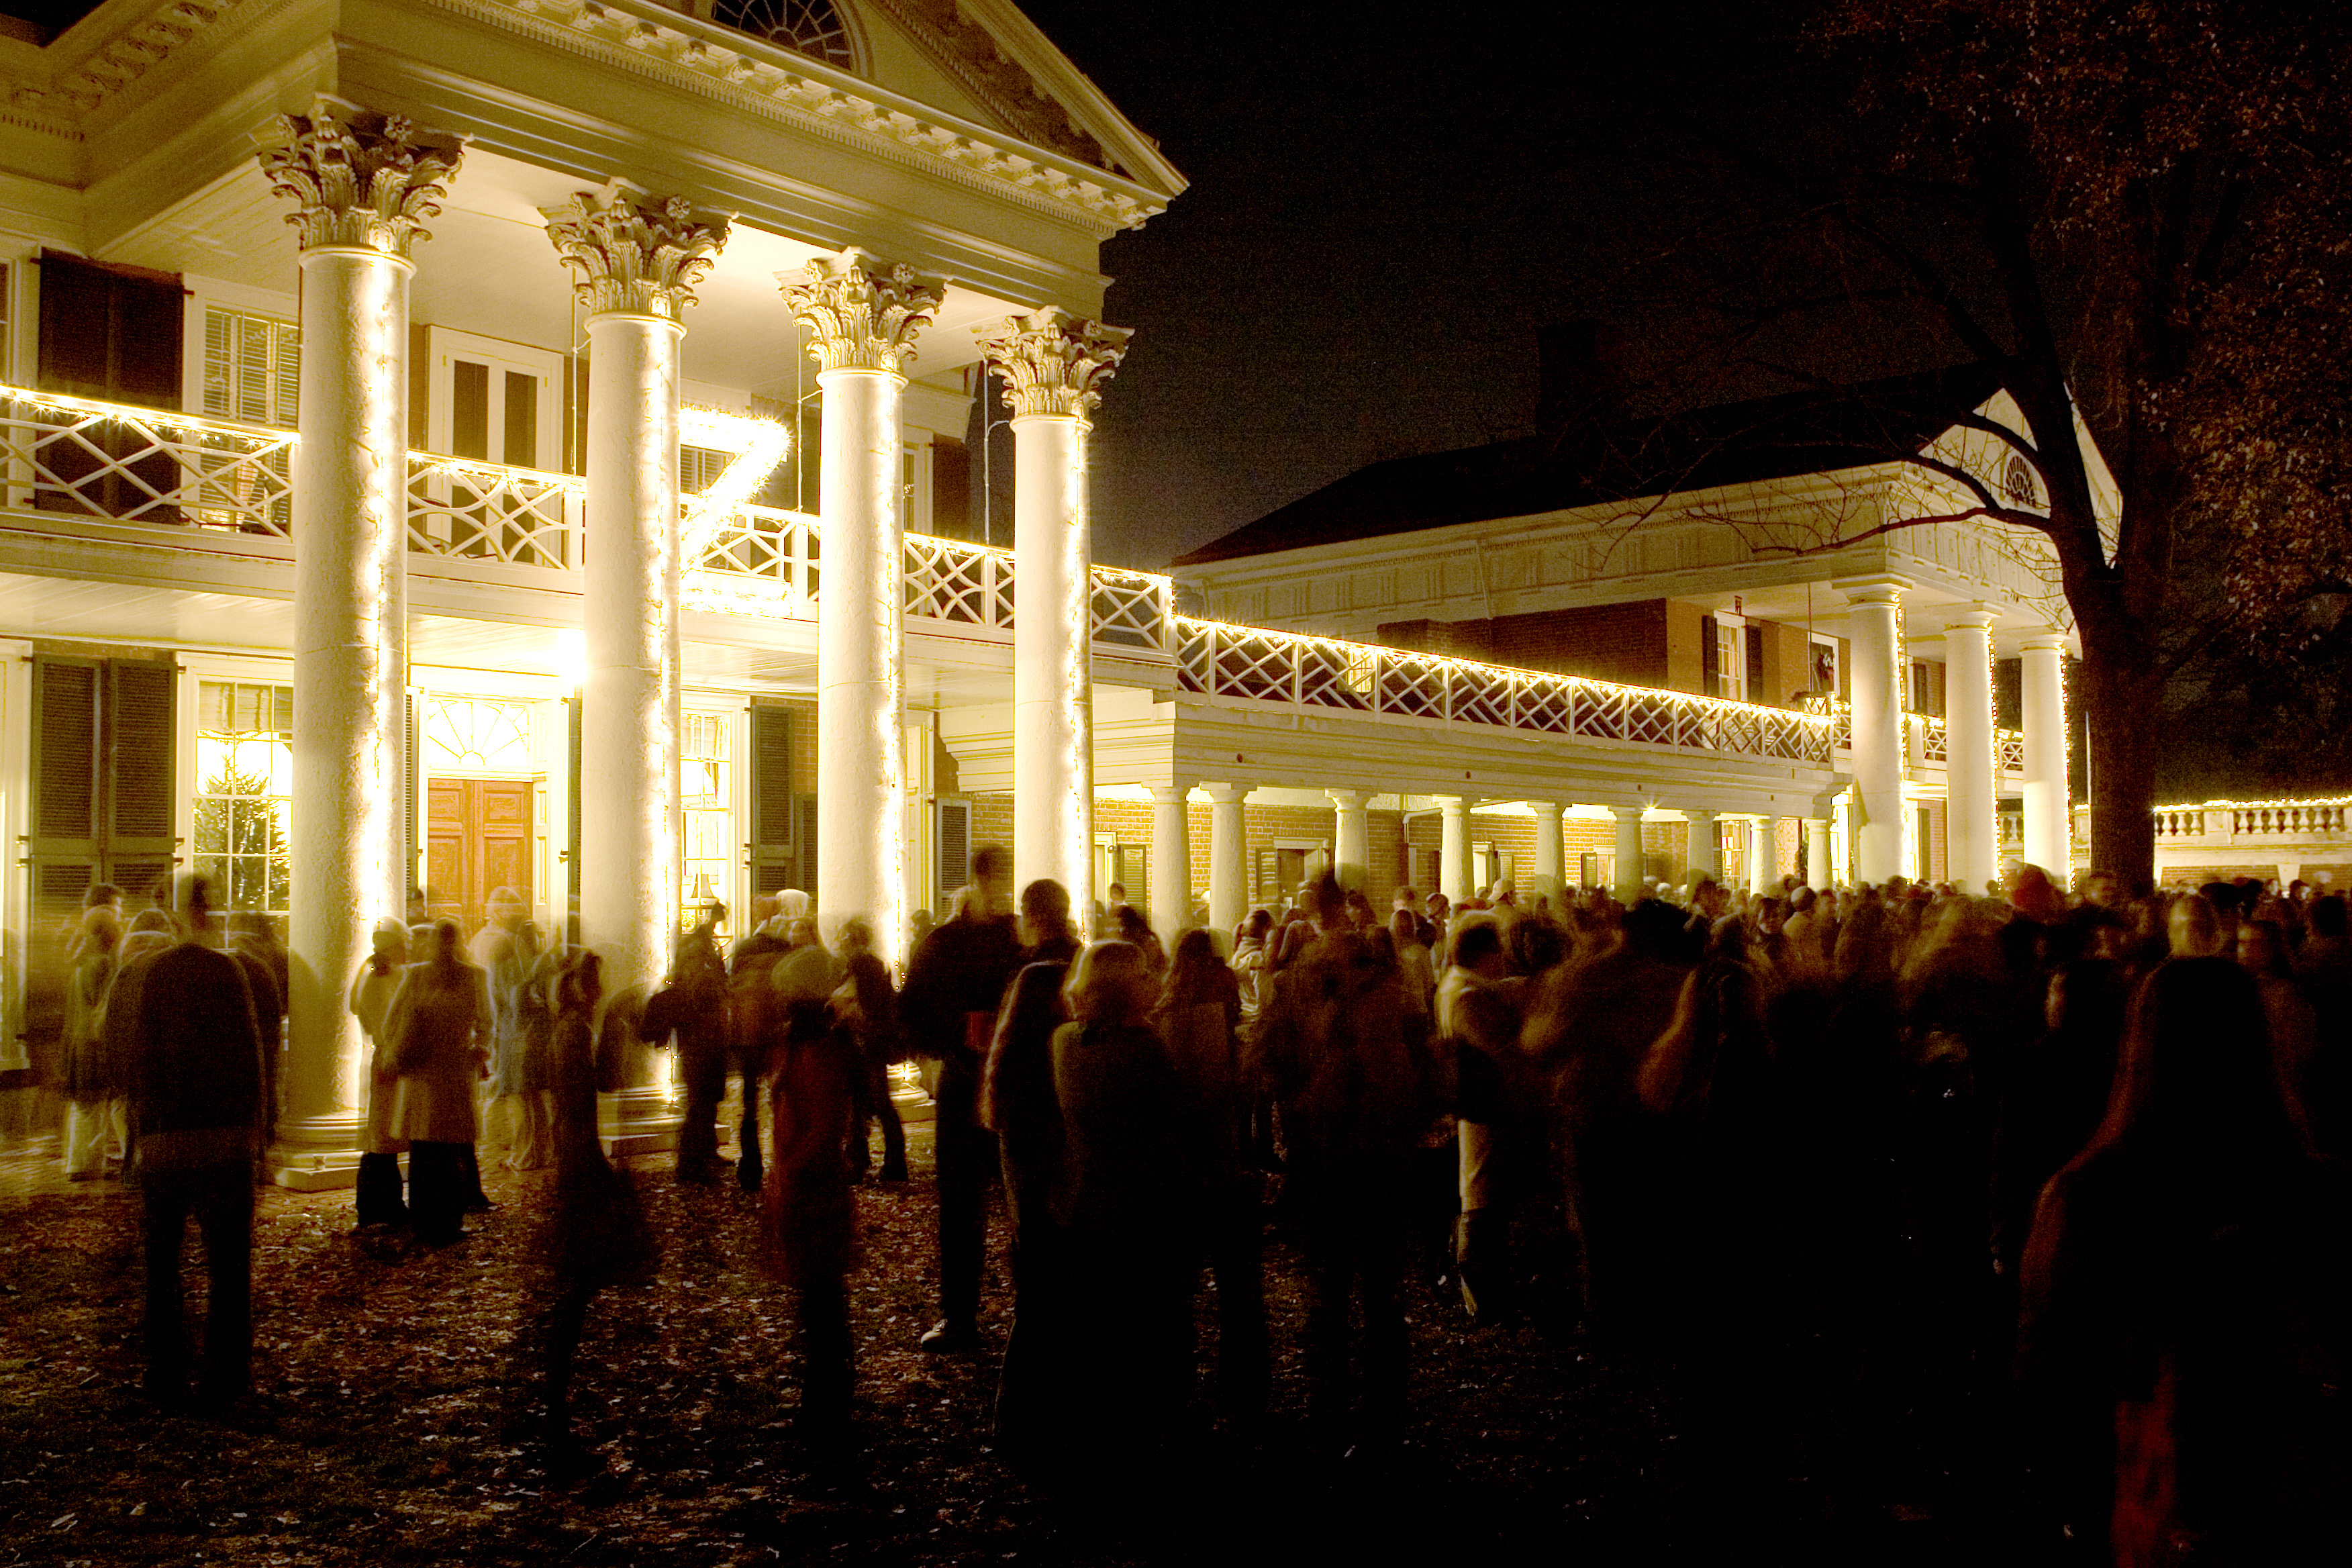 Crowd gathered on the lawn while the buildings are outlined in white lights